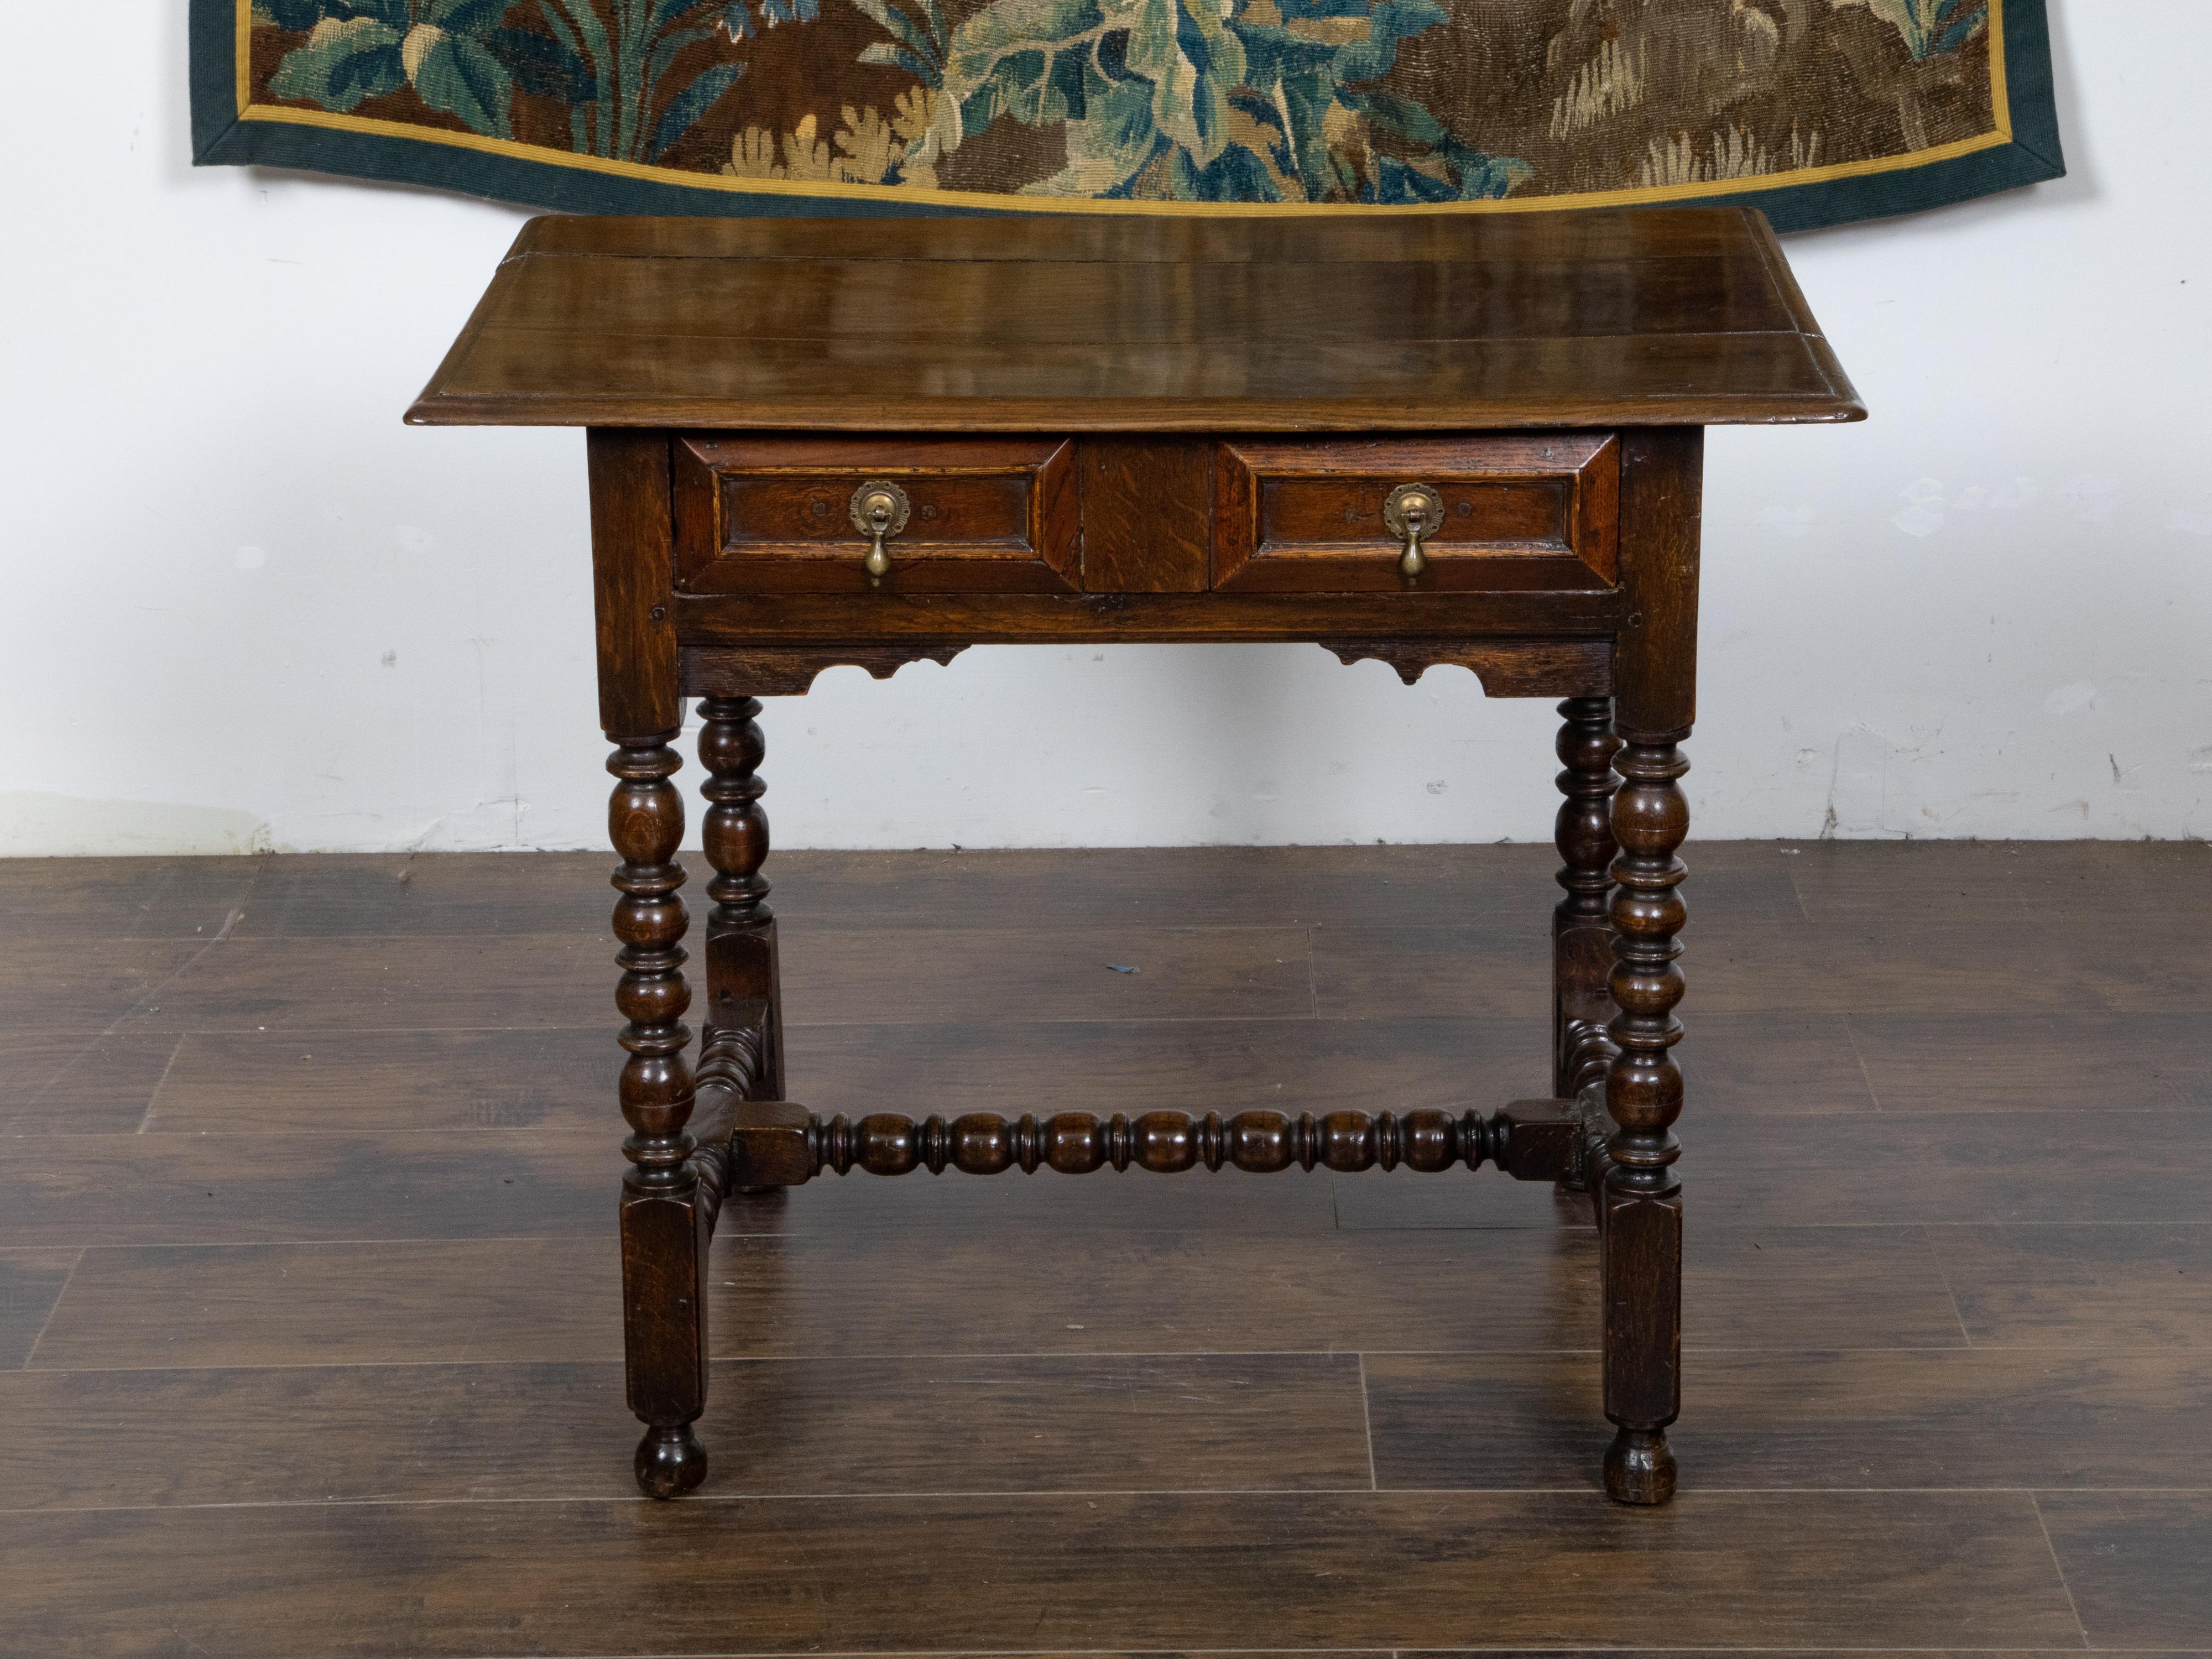 An English carved geometric front oak side table from the 19th century, with single drawer, bobbin legs, H-form cross stretcher and brass hardware. Created in England during the 19th century, this oak side table features a rectangular planked top